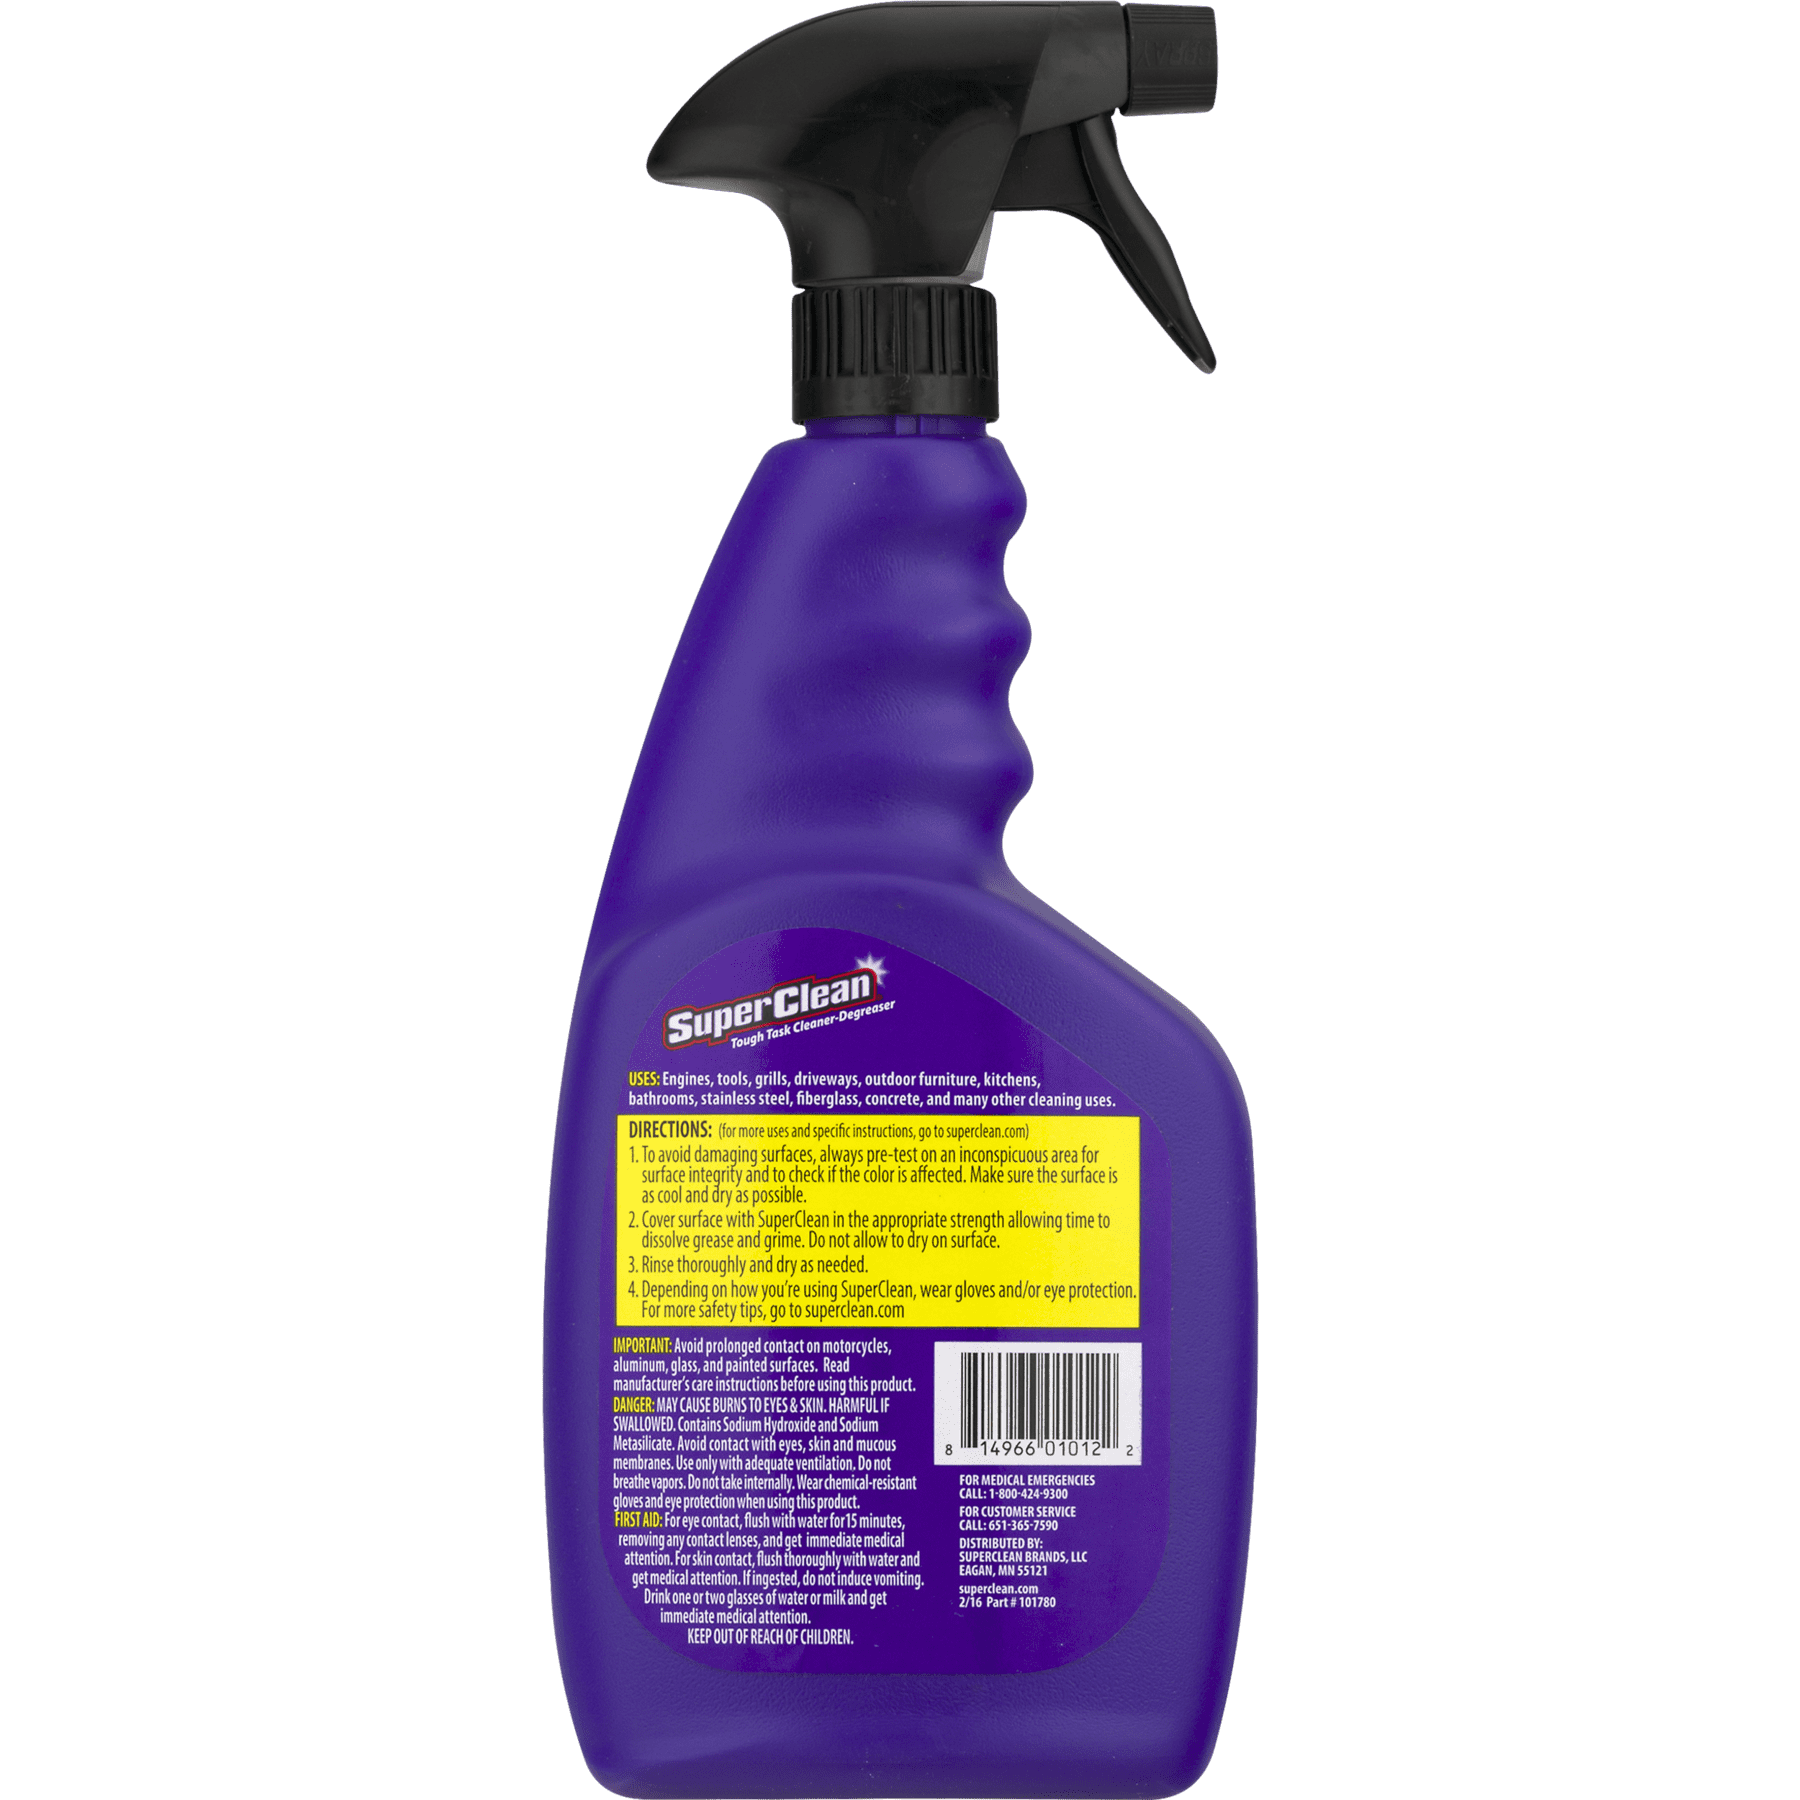 SuperClean Multi-Surface All Purpose Cleaner Degreaser Spray,  Biodegradable, Full Concentrate, Scent Free, 32 Ounce, Pack of 2